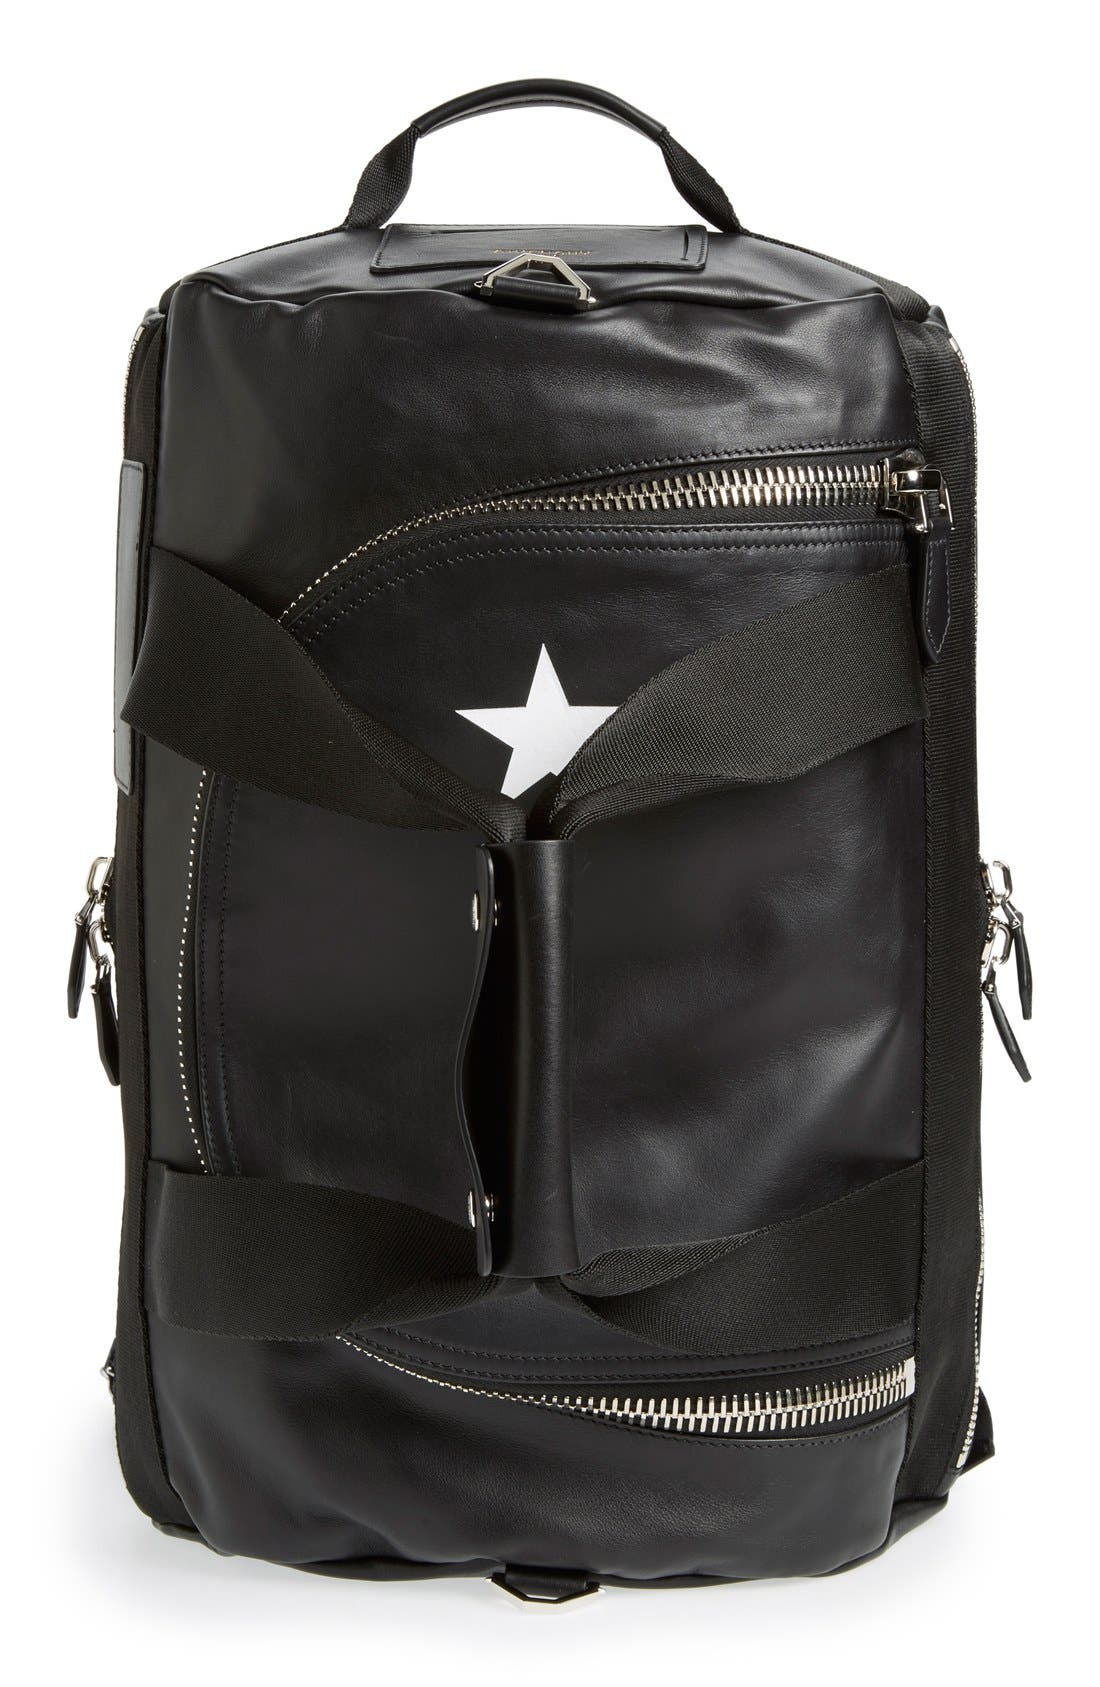 Givenchy 'Star' Convertible Leather 